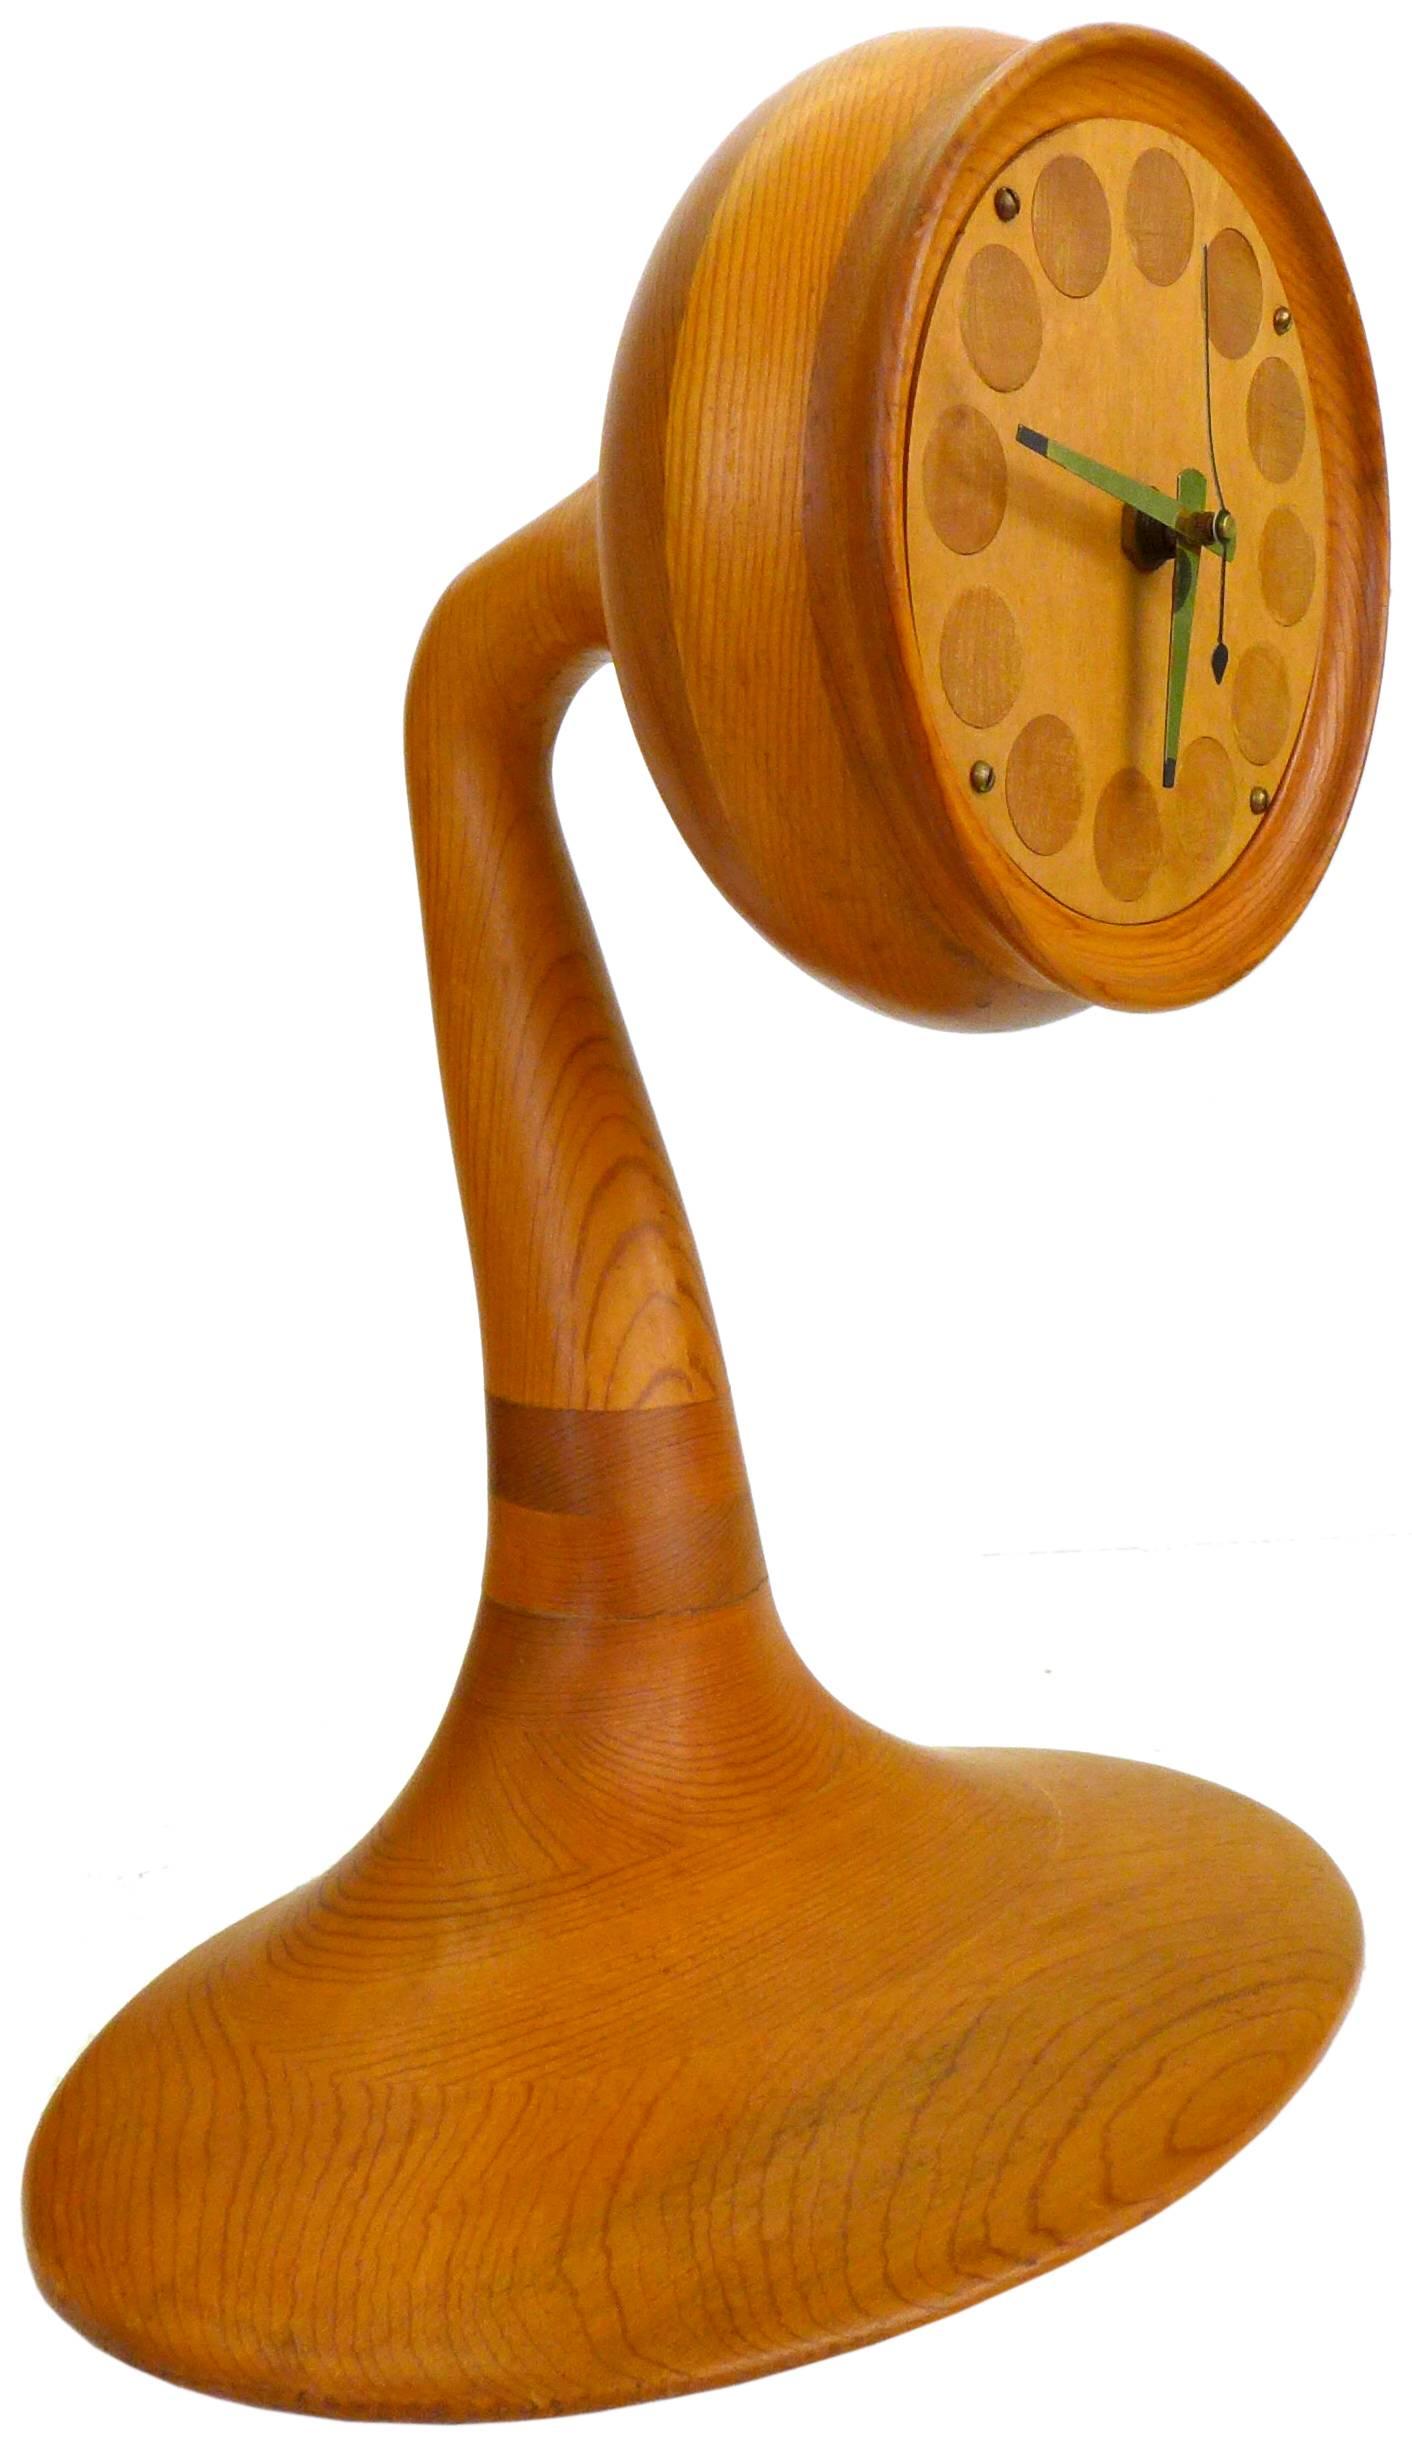 A wonderfully sculptural and well executed American craft table clock, signed 